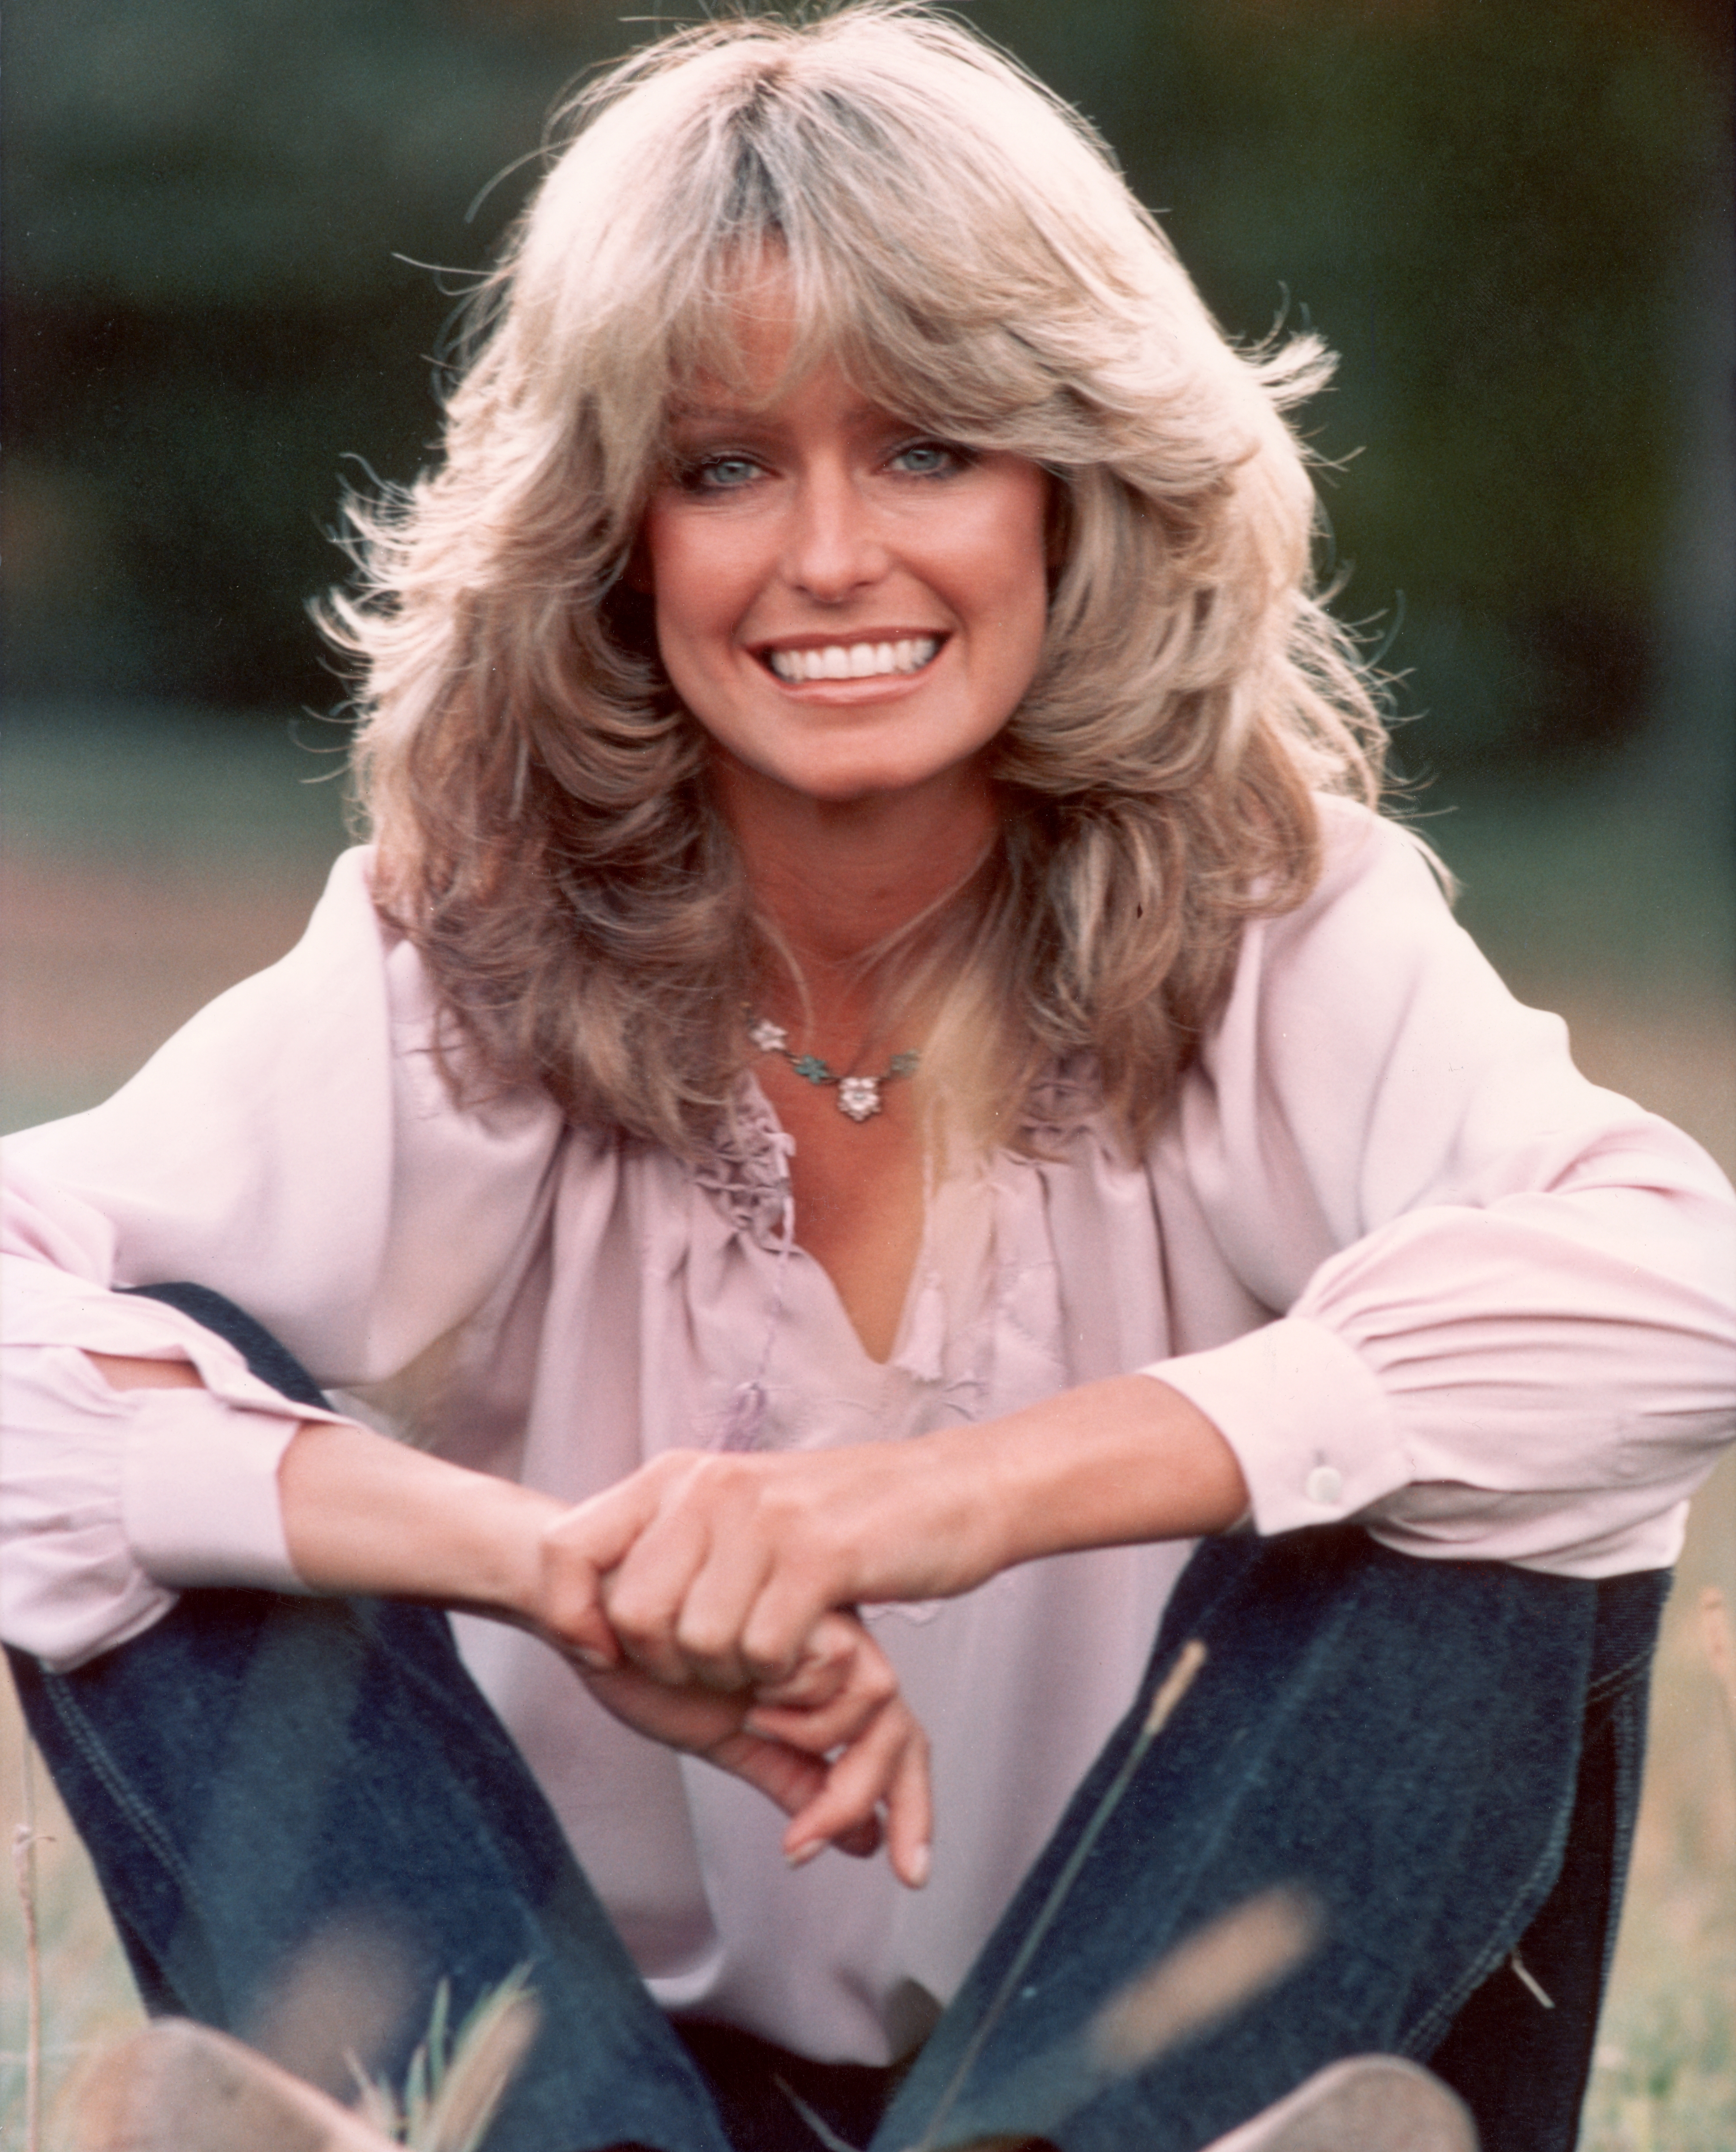 Farrah Fawcett photographed in 1975 | Source: Getty Images